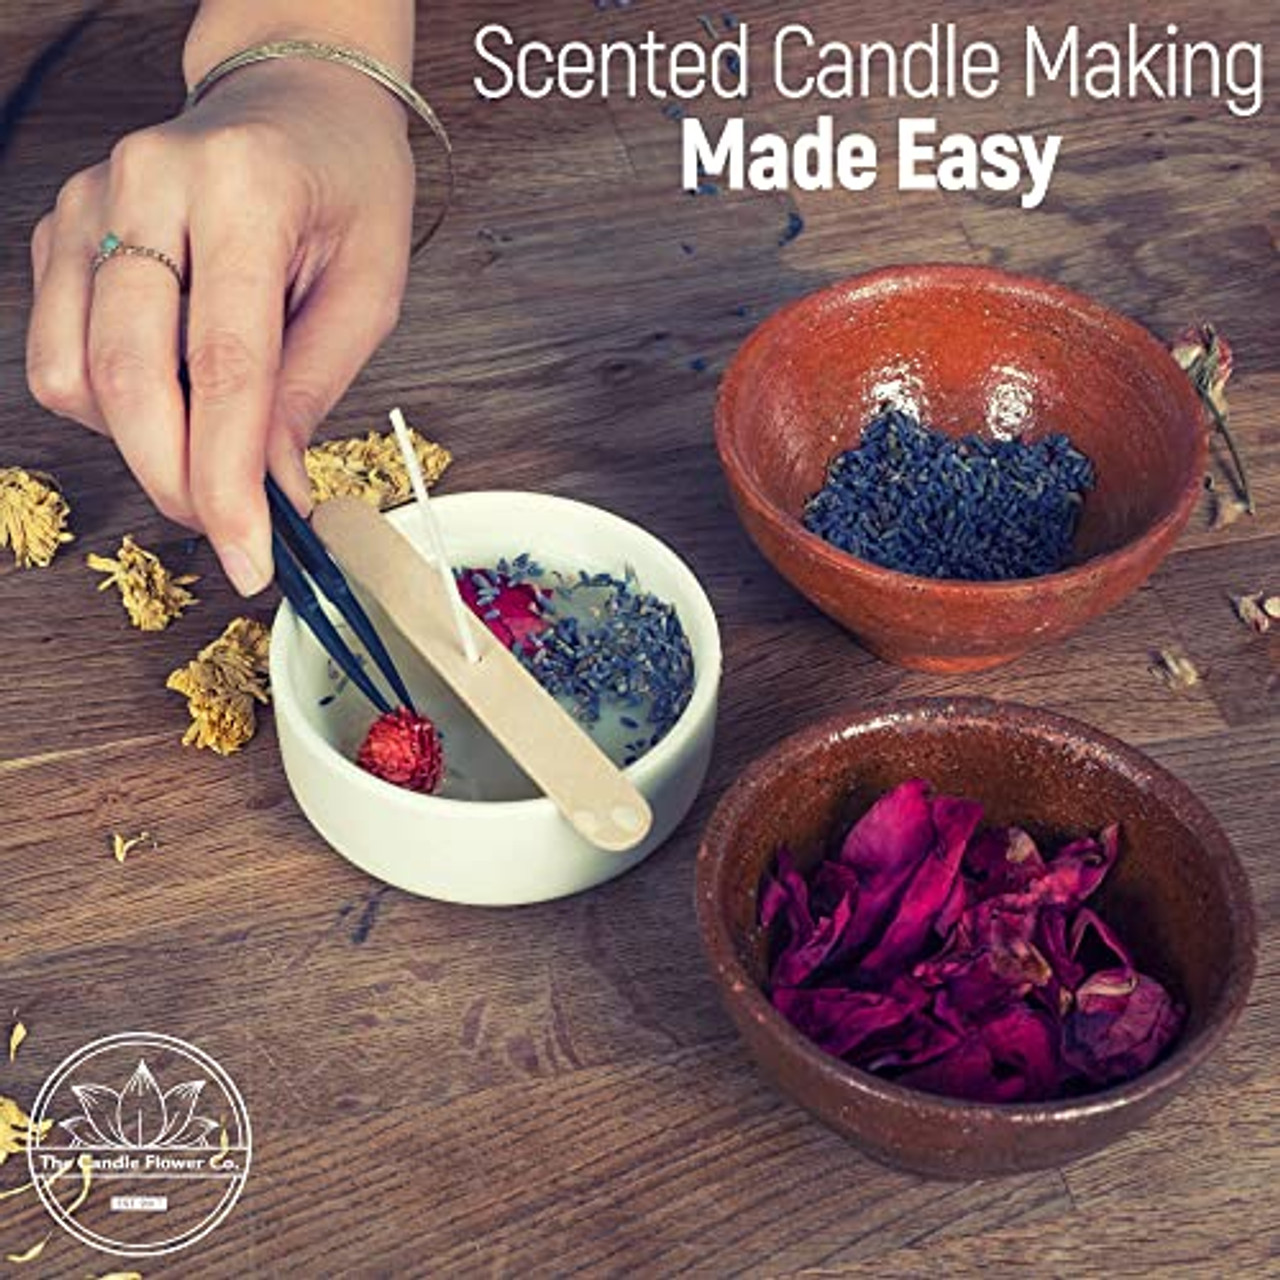 Craftbud DIY Candle Making Mini Supply Kit - 2lbs Natural Soy Wax, Fragrance Oil, Cotton Wicks, Centering Tool, and Glue Sticker - Multi